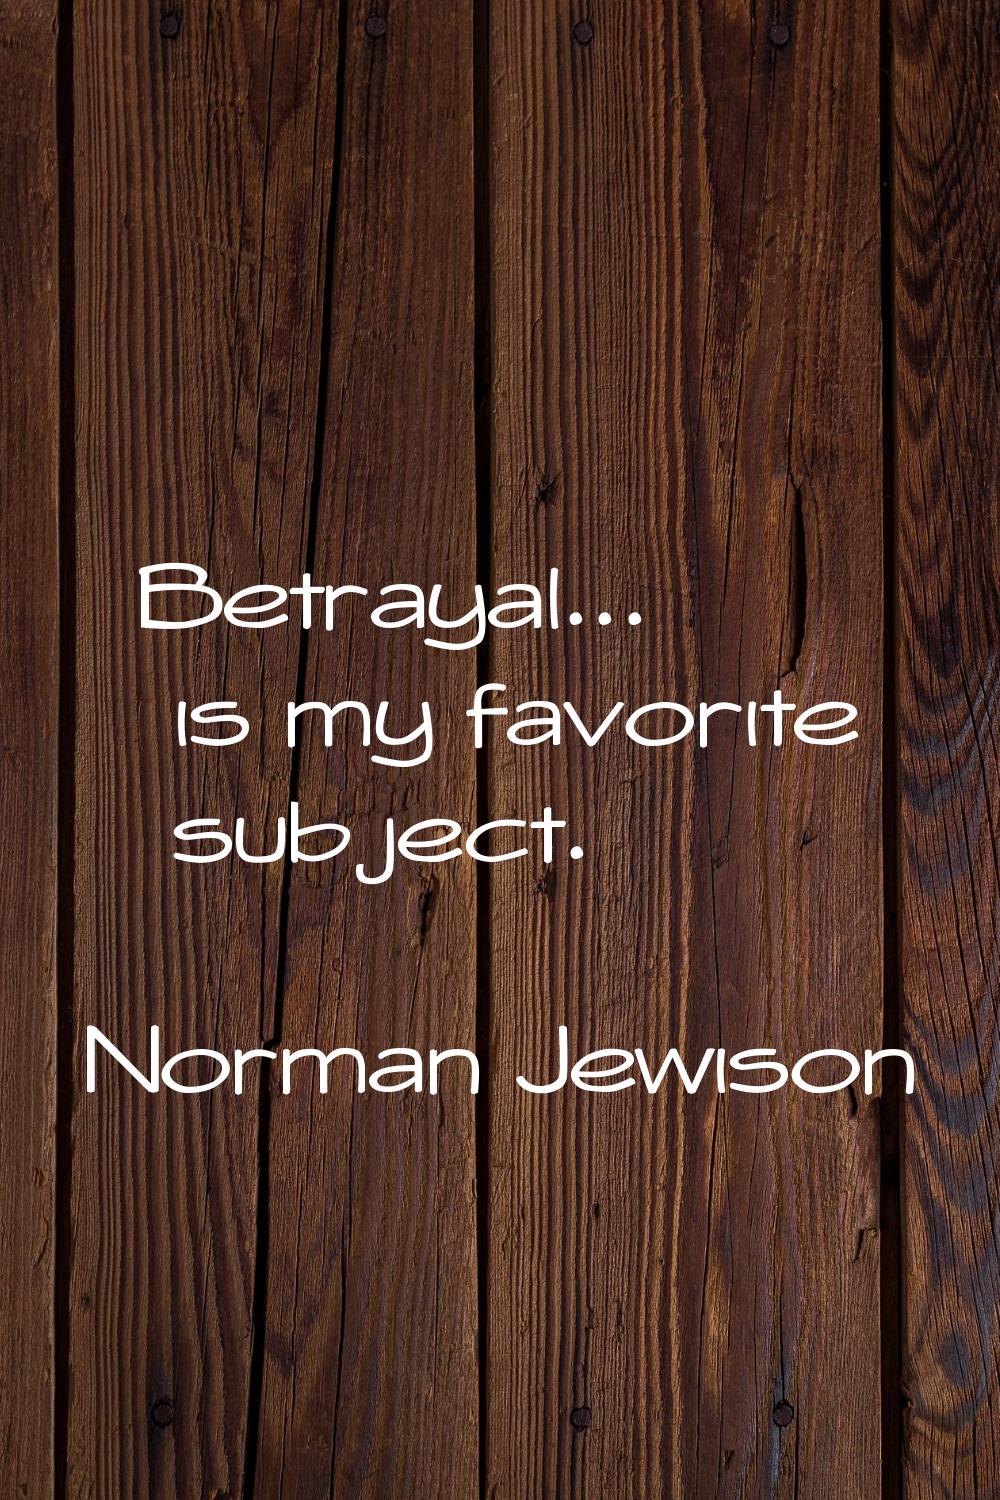 Betrayal... is my favorite subject.